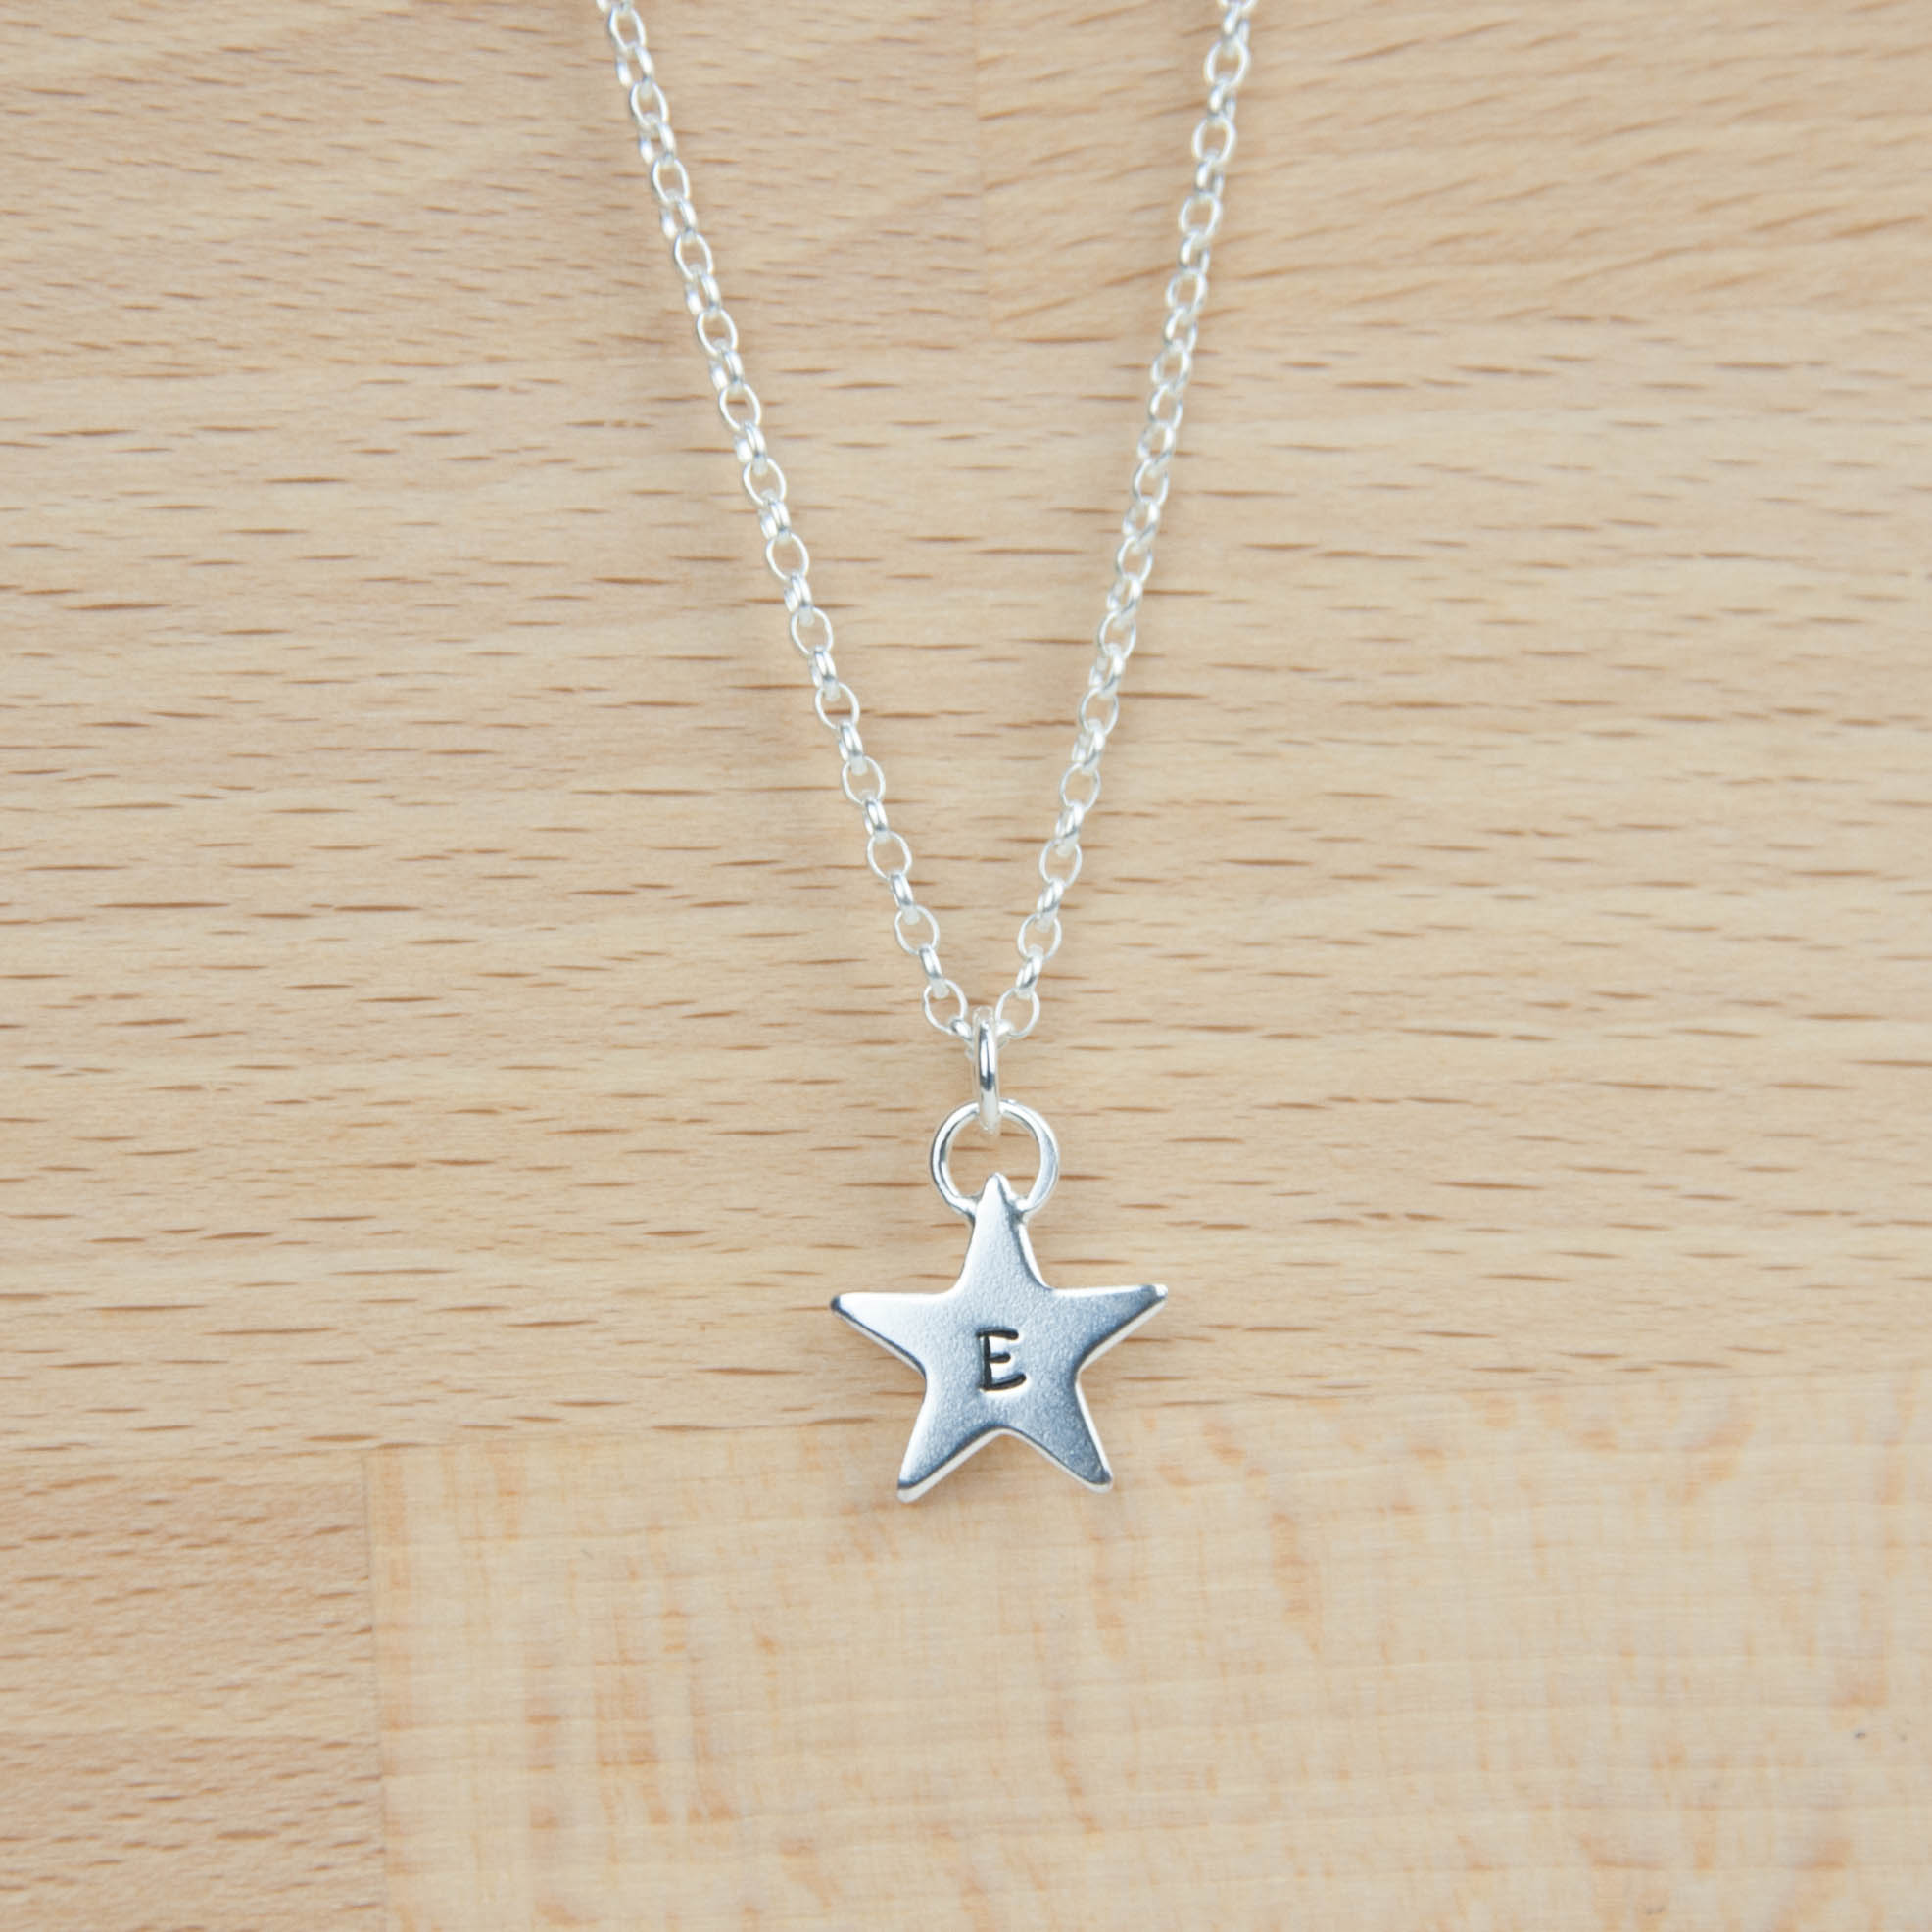 Belle & Bee mini star necklace